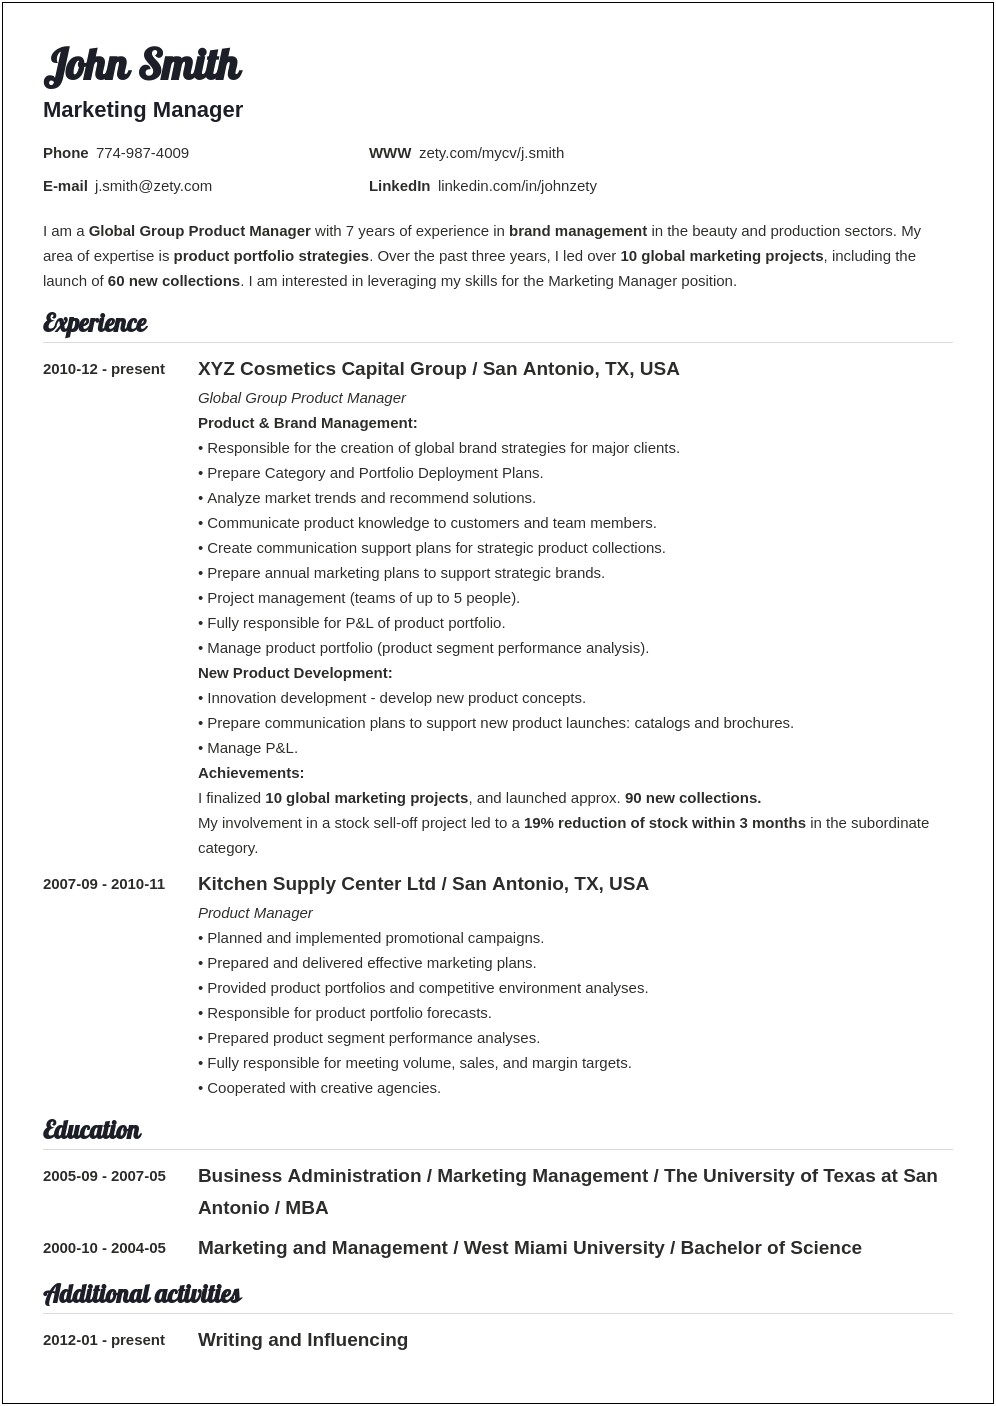 Resume Based On Education Examples